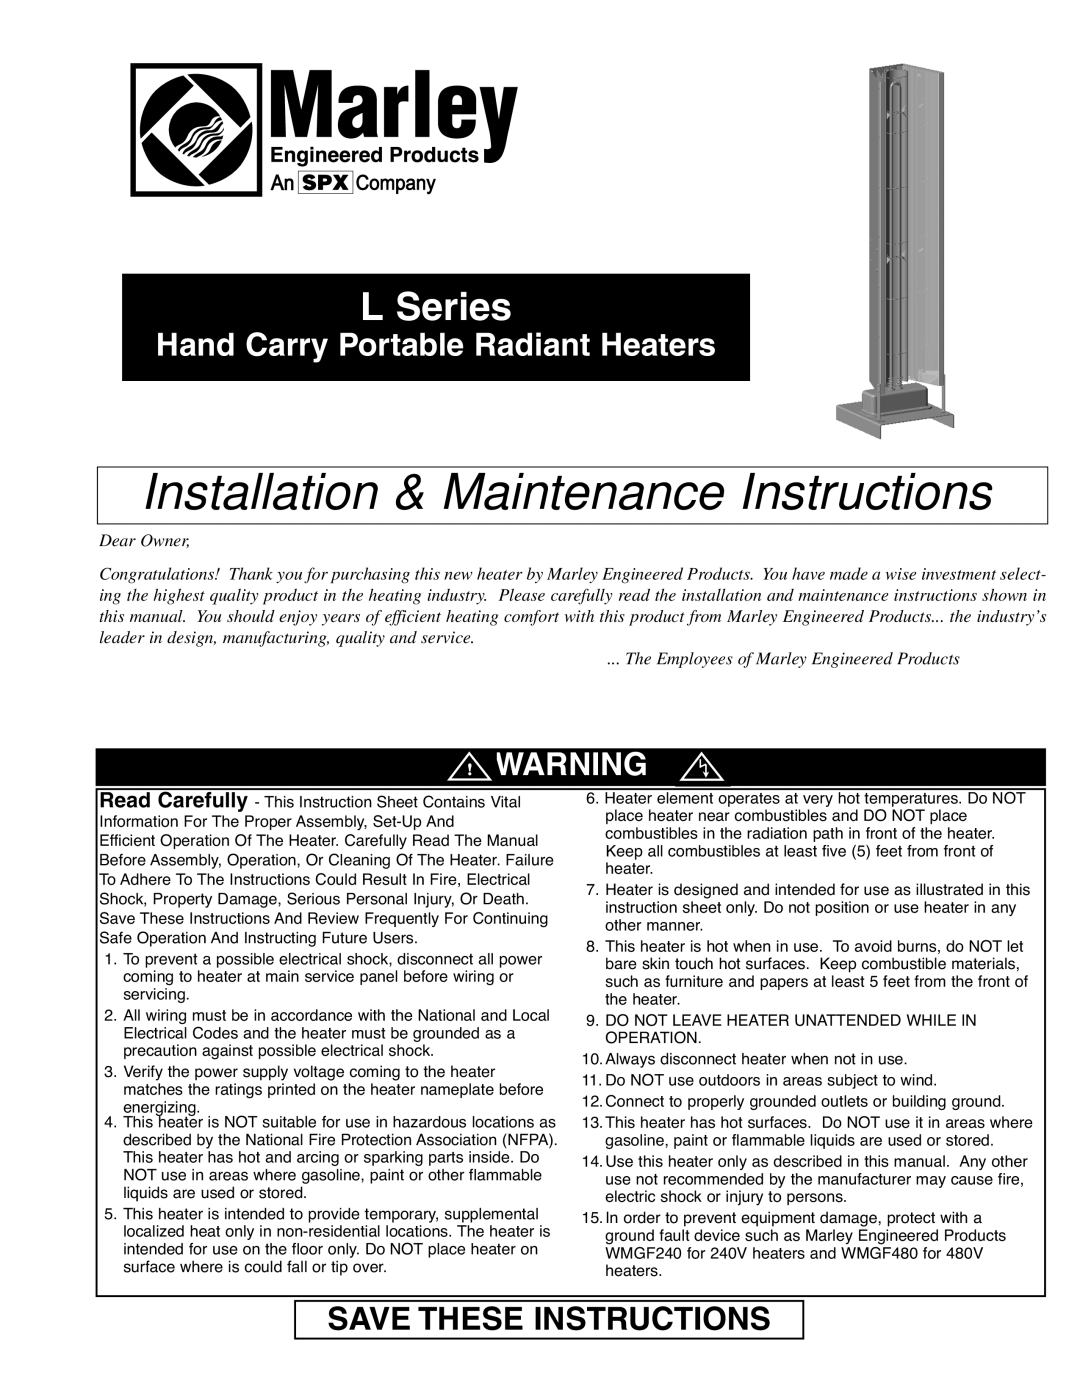 Marley Engineered Products WMGF240 instruction sheet Installation & Maintenance Instructions, L Series, Dear Owner 